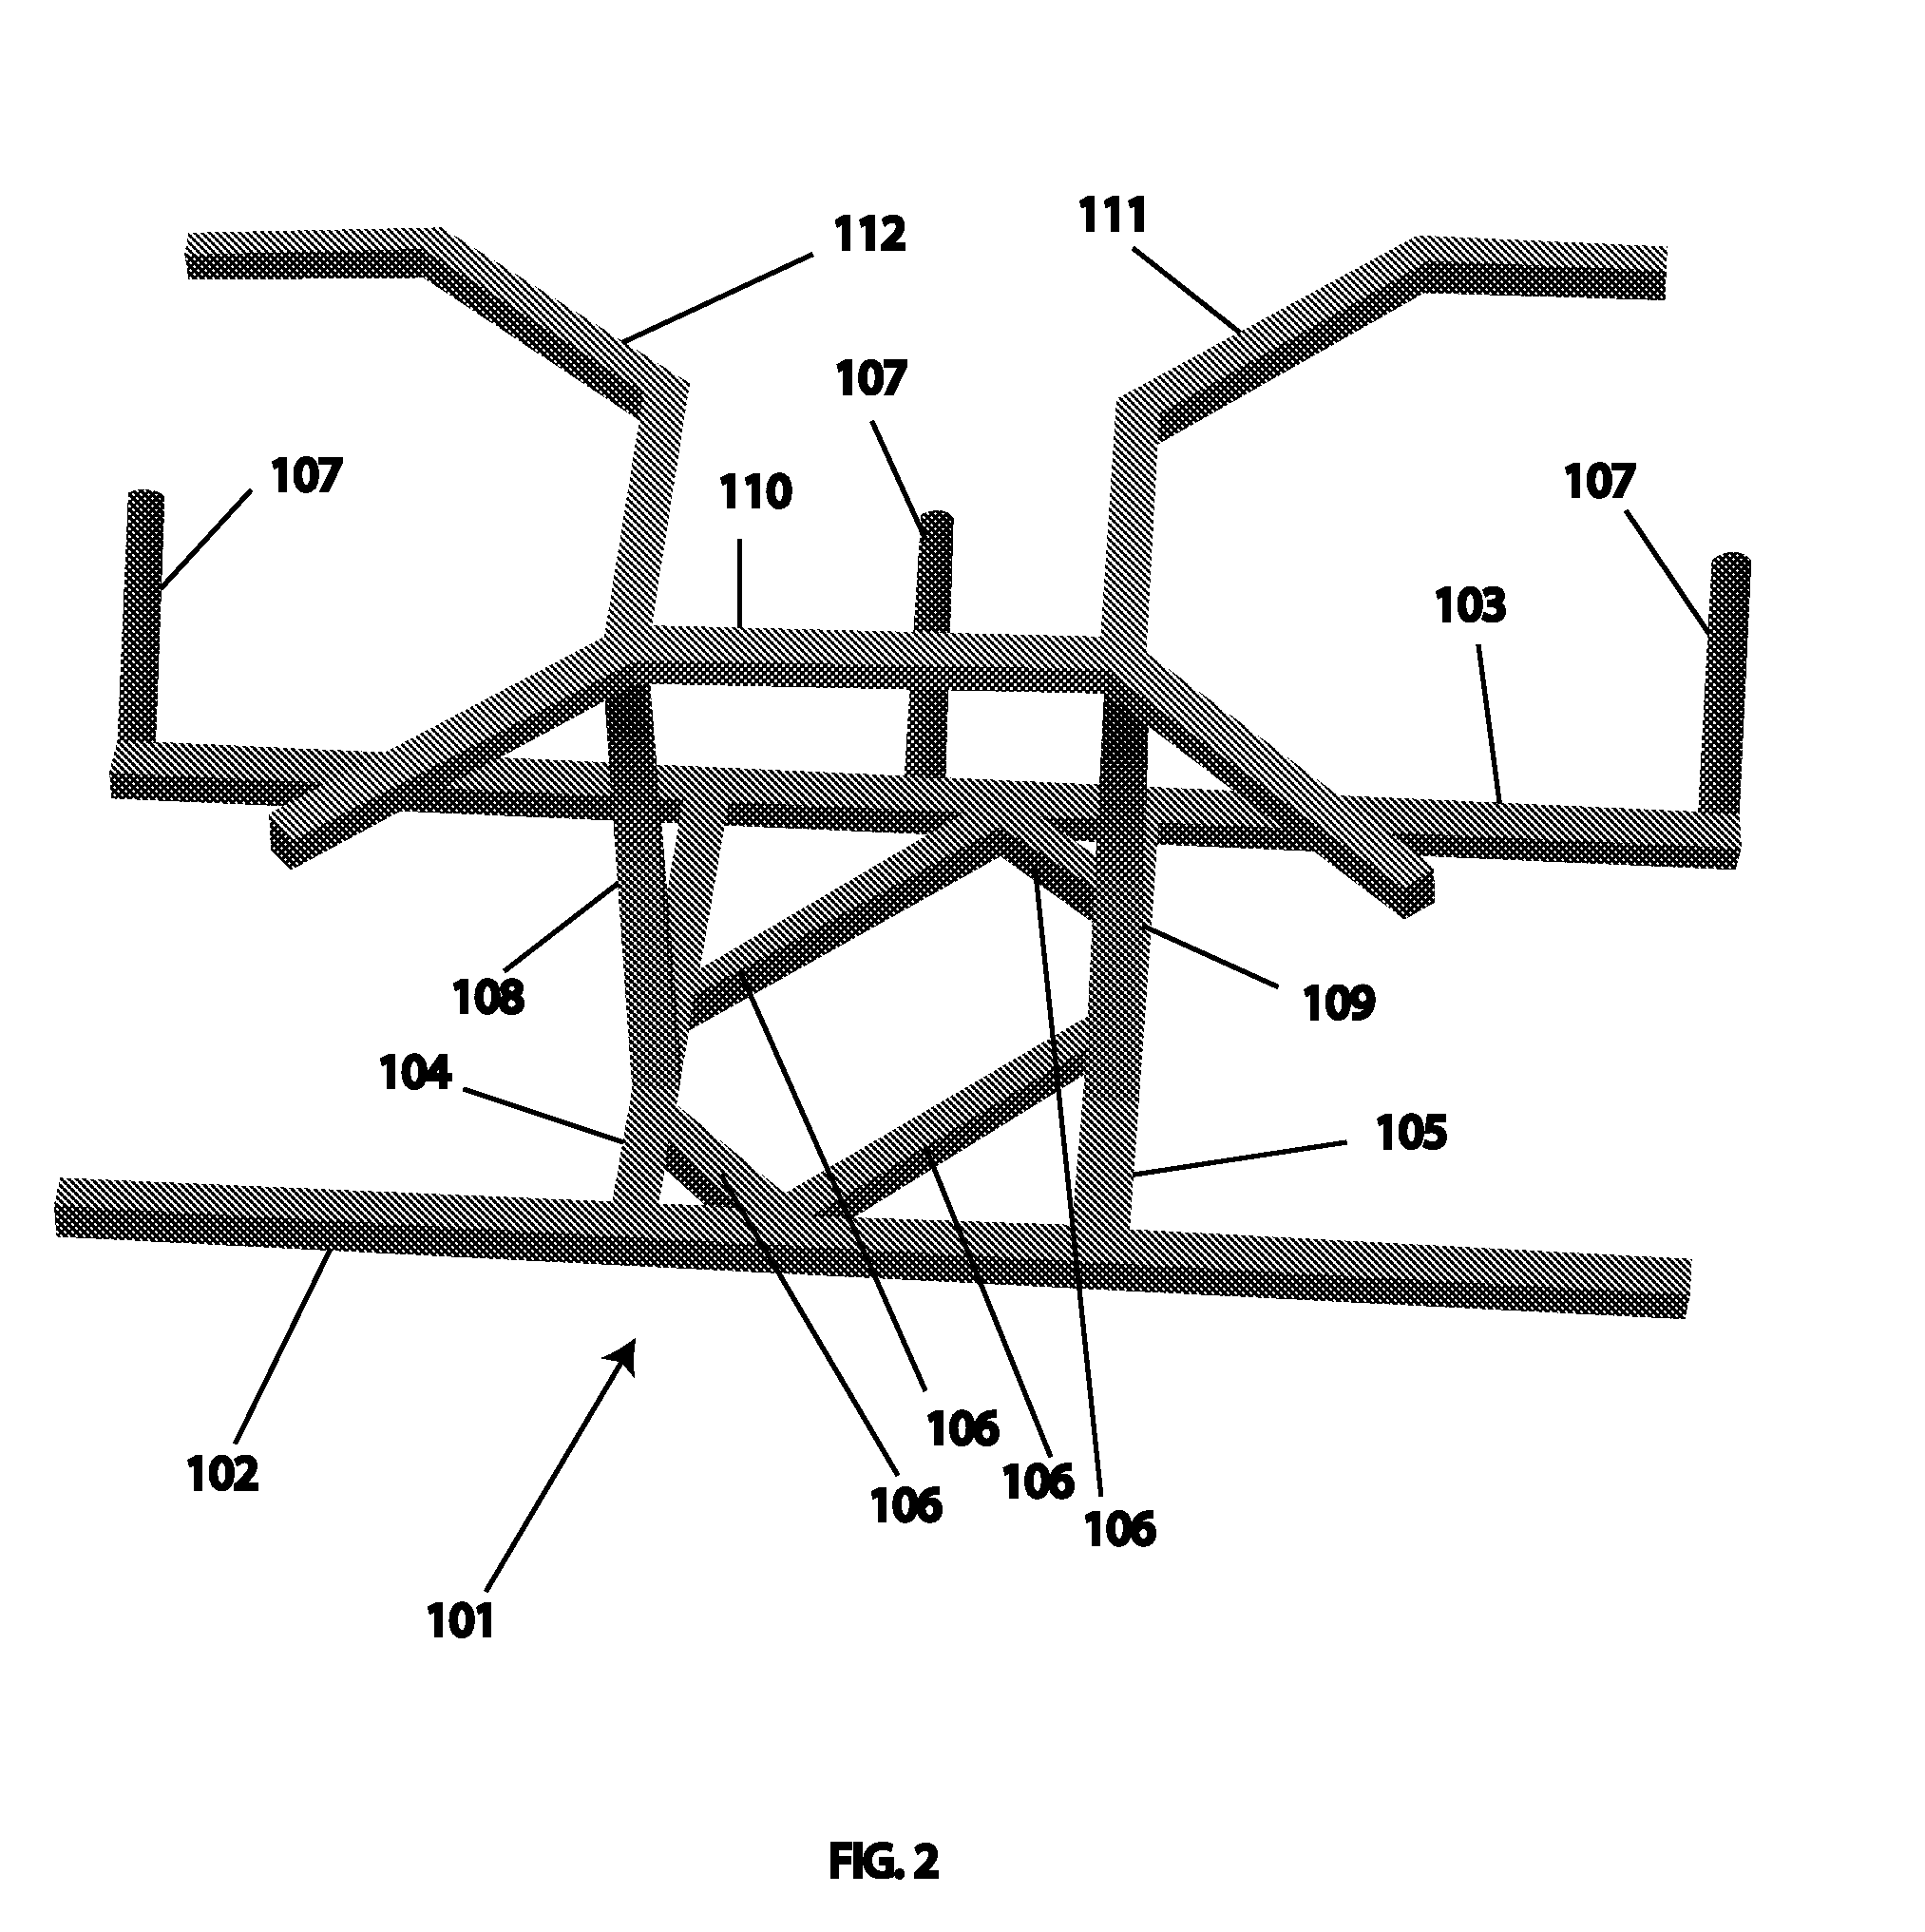 Log supporting and guiding apparatus for improved burning